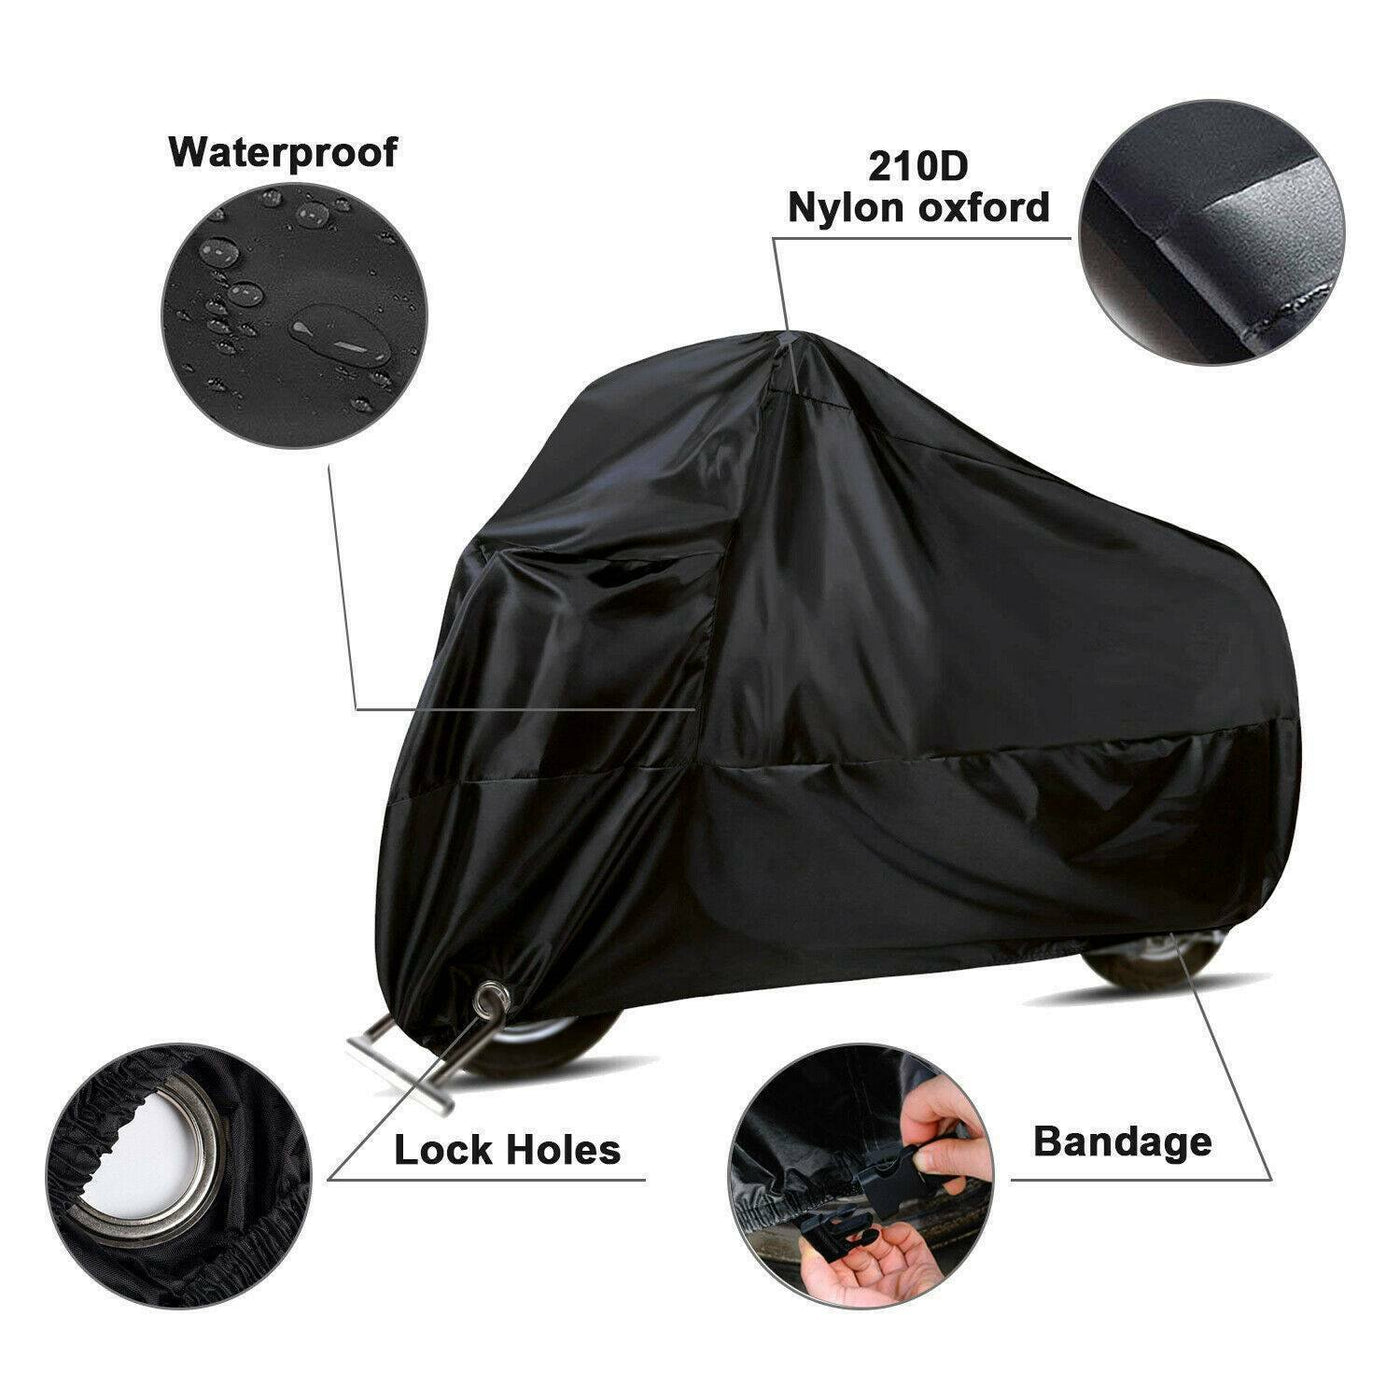 XXL Black Motorcycle Cover waterproof Heavy Duty For Winter Outside Storage Rain - Moto Life Products